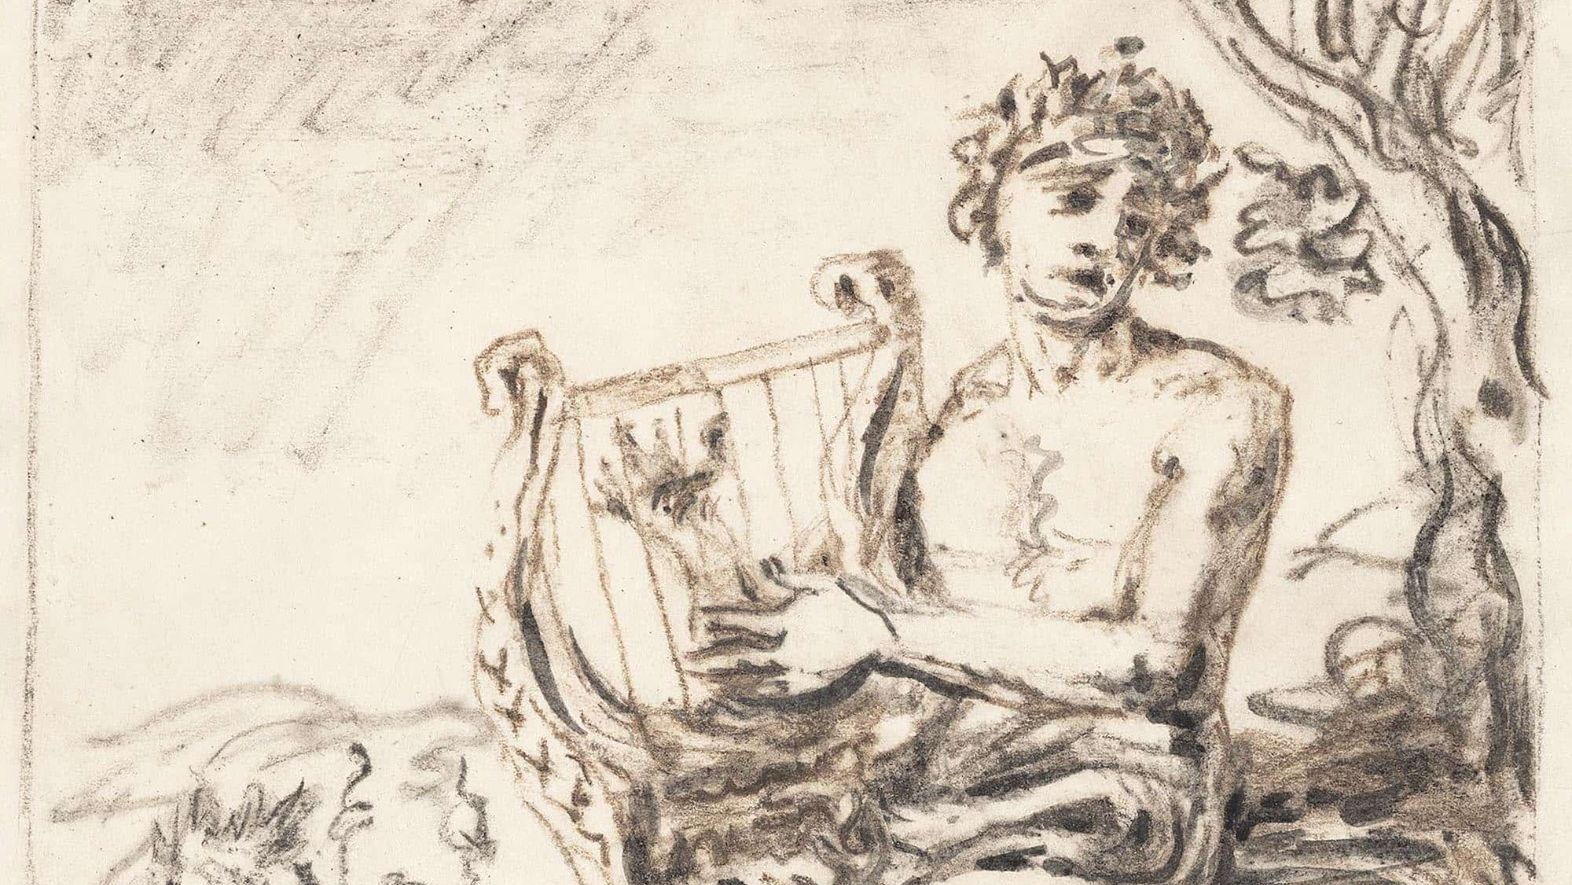 Charcoal sketch on paper by De Chirico of Orpheus playing the lyra, sitting by a tree.